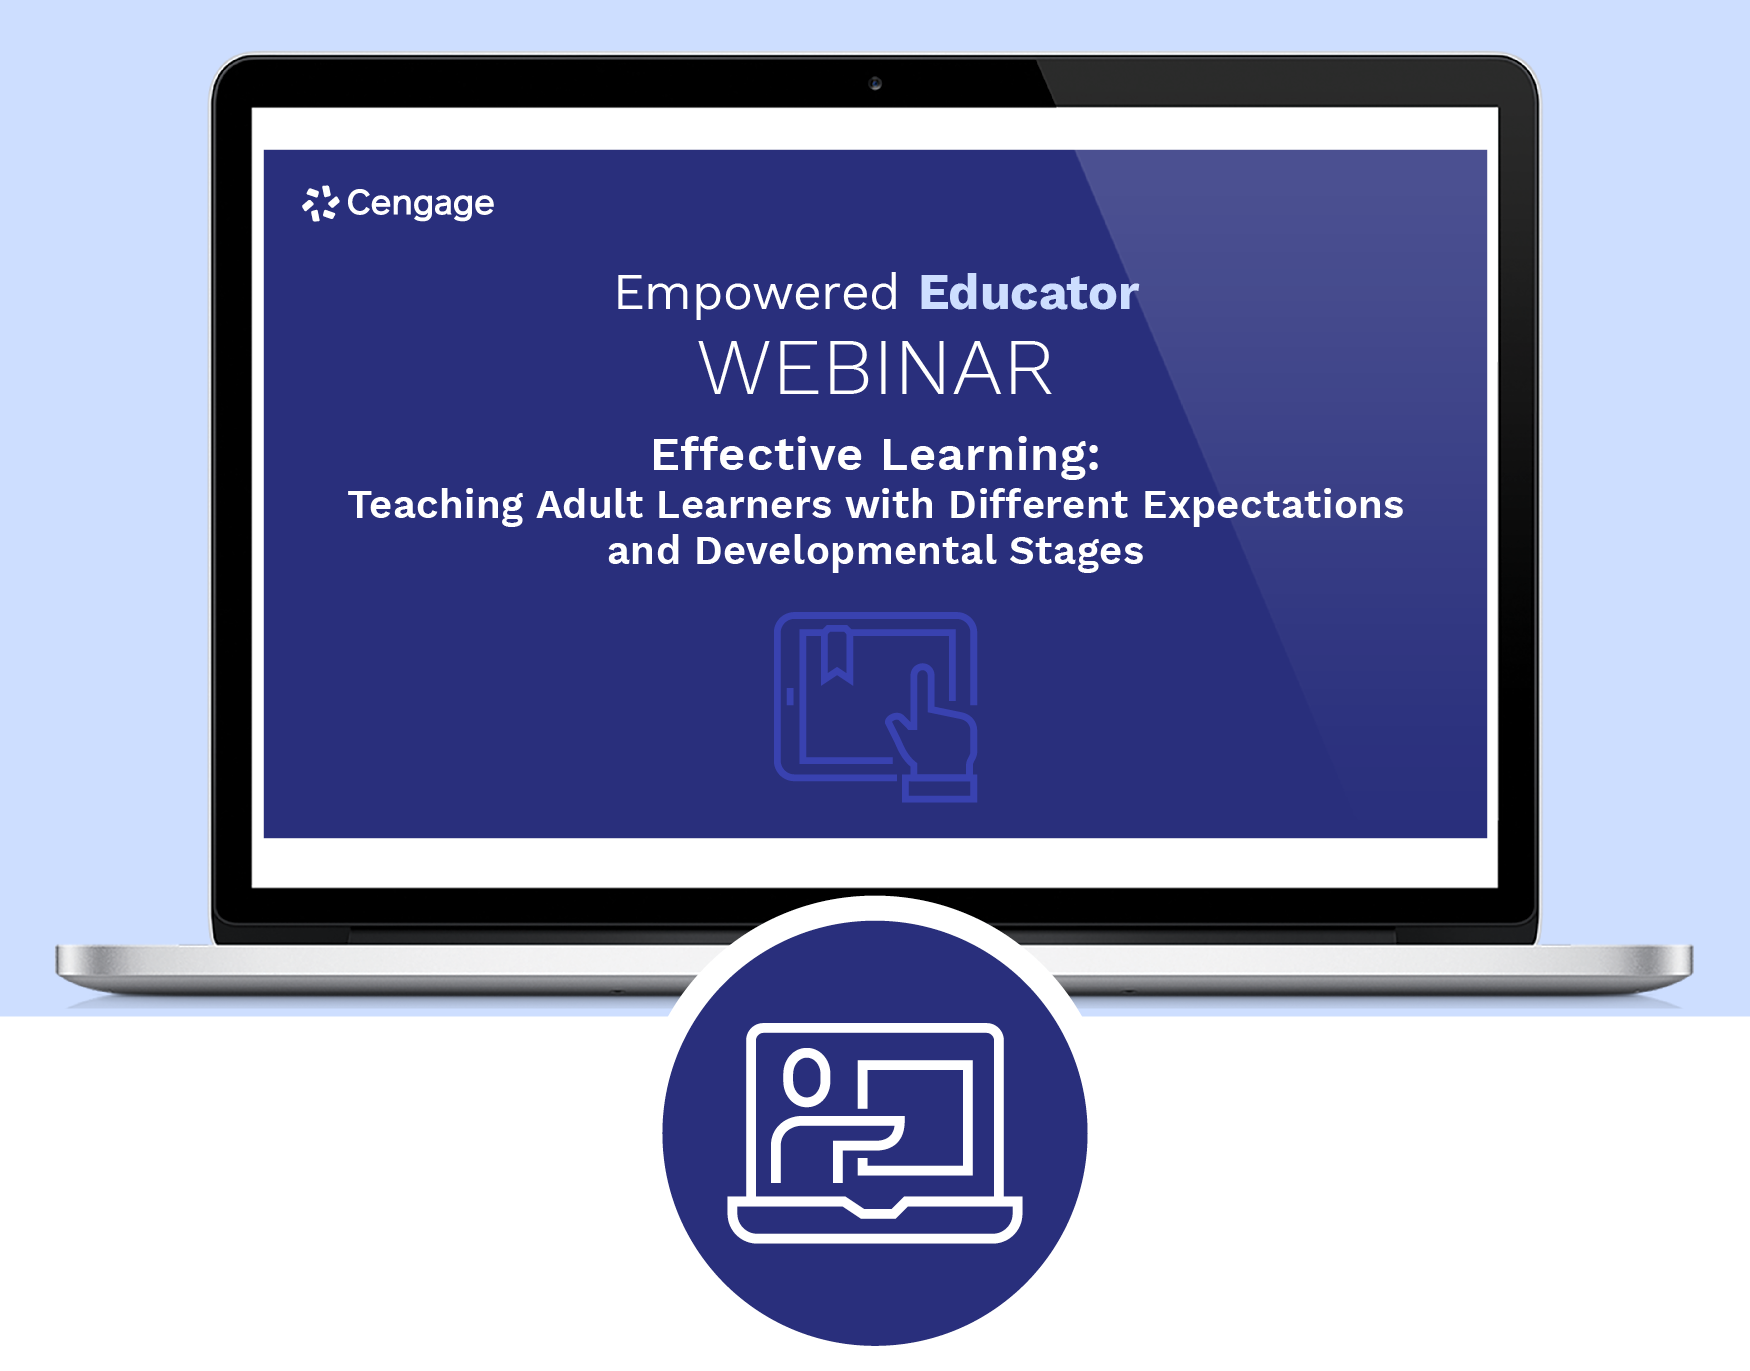 Effective Learning:<br/> Teaching Learners with Different Expectations and Developmental Stages